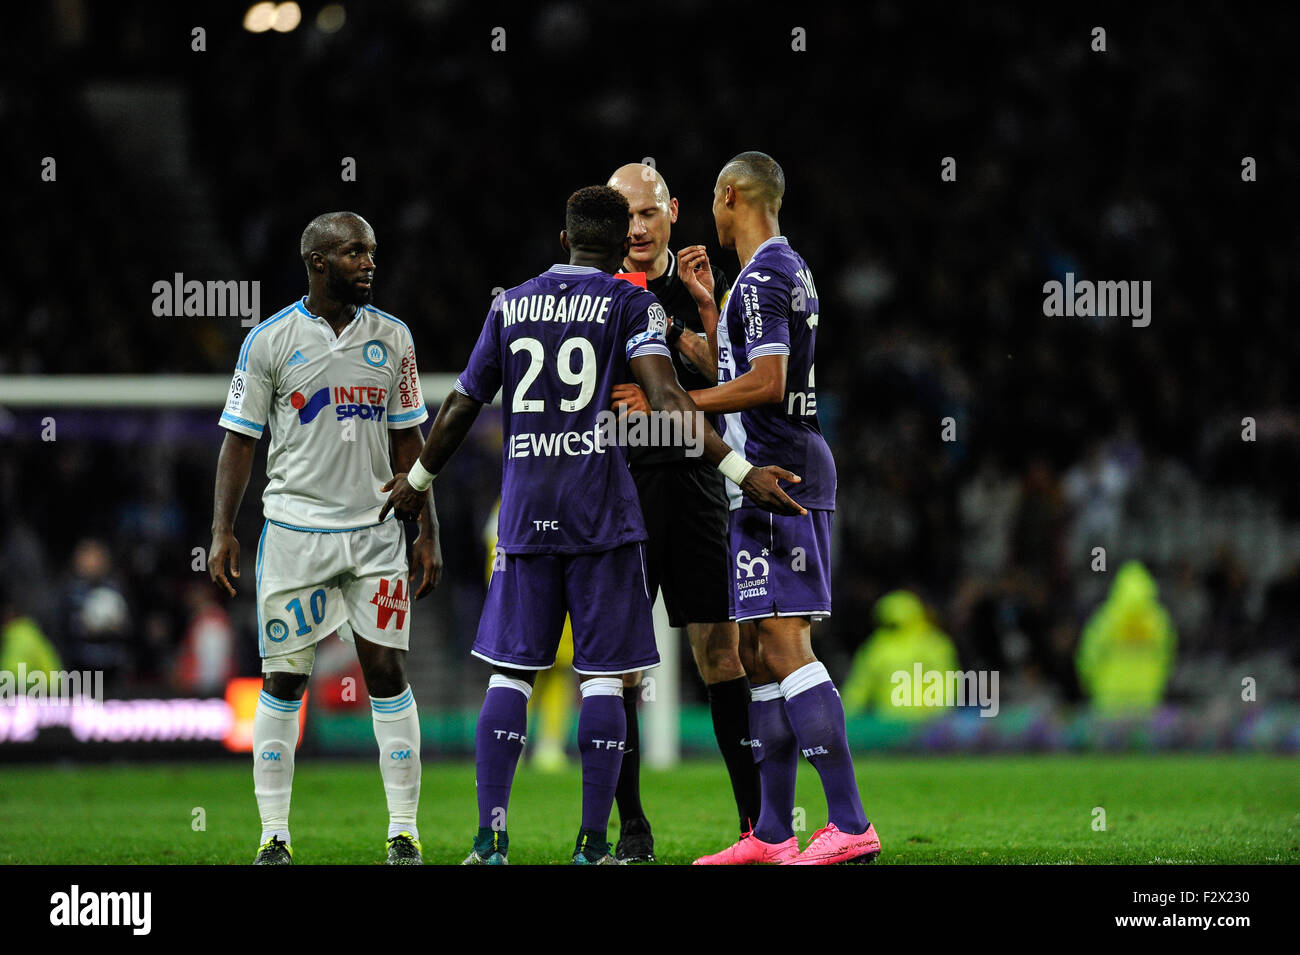 Toulouse, France. 23rd Sep, 2015. French League 1 football. Toulouse versus  Marseille. Referee shows the red card to Jacques Moubandje (tfc) © Action  Plus Sports/Alamy Live News Stock Photo - Alamy